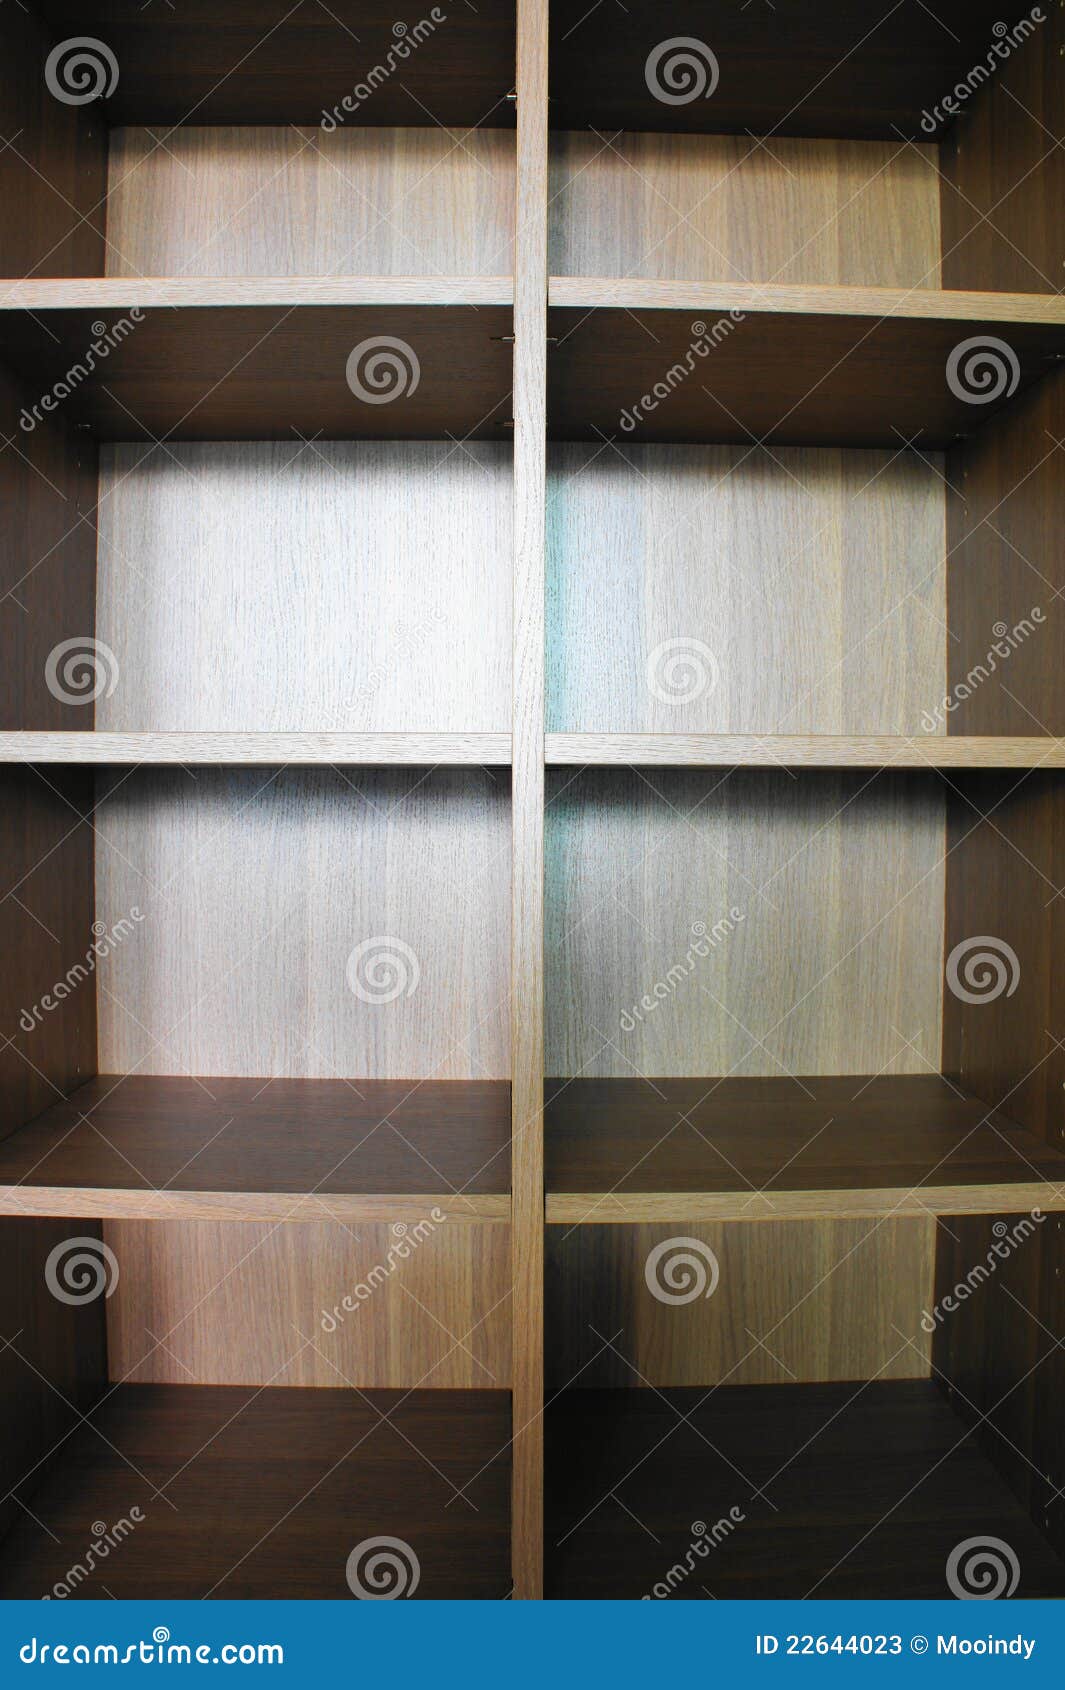 Empty Book Shelf Stock Image Image Of Office Compartment 22644023